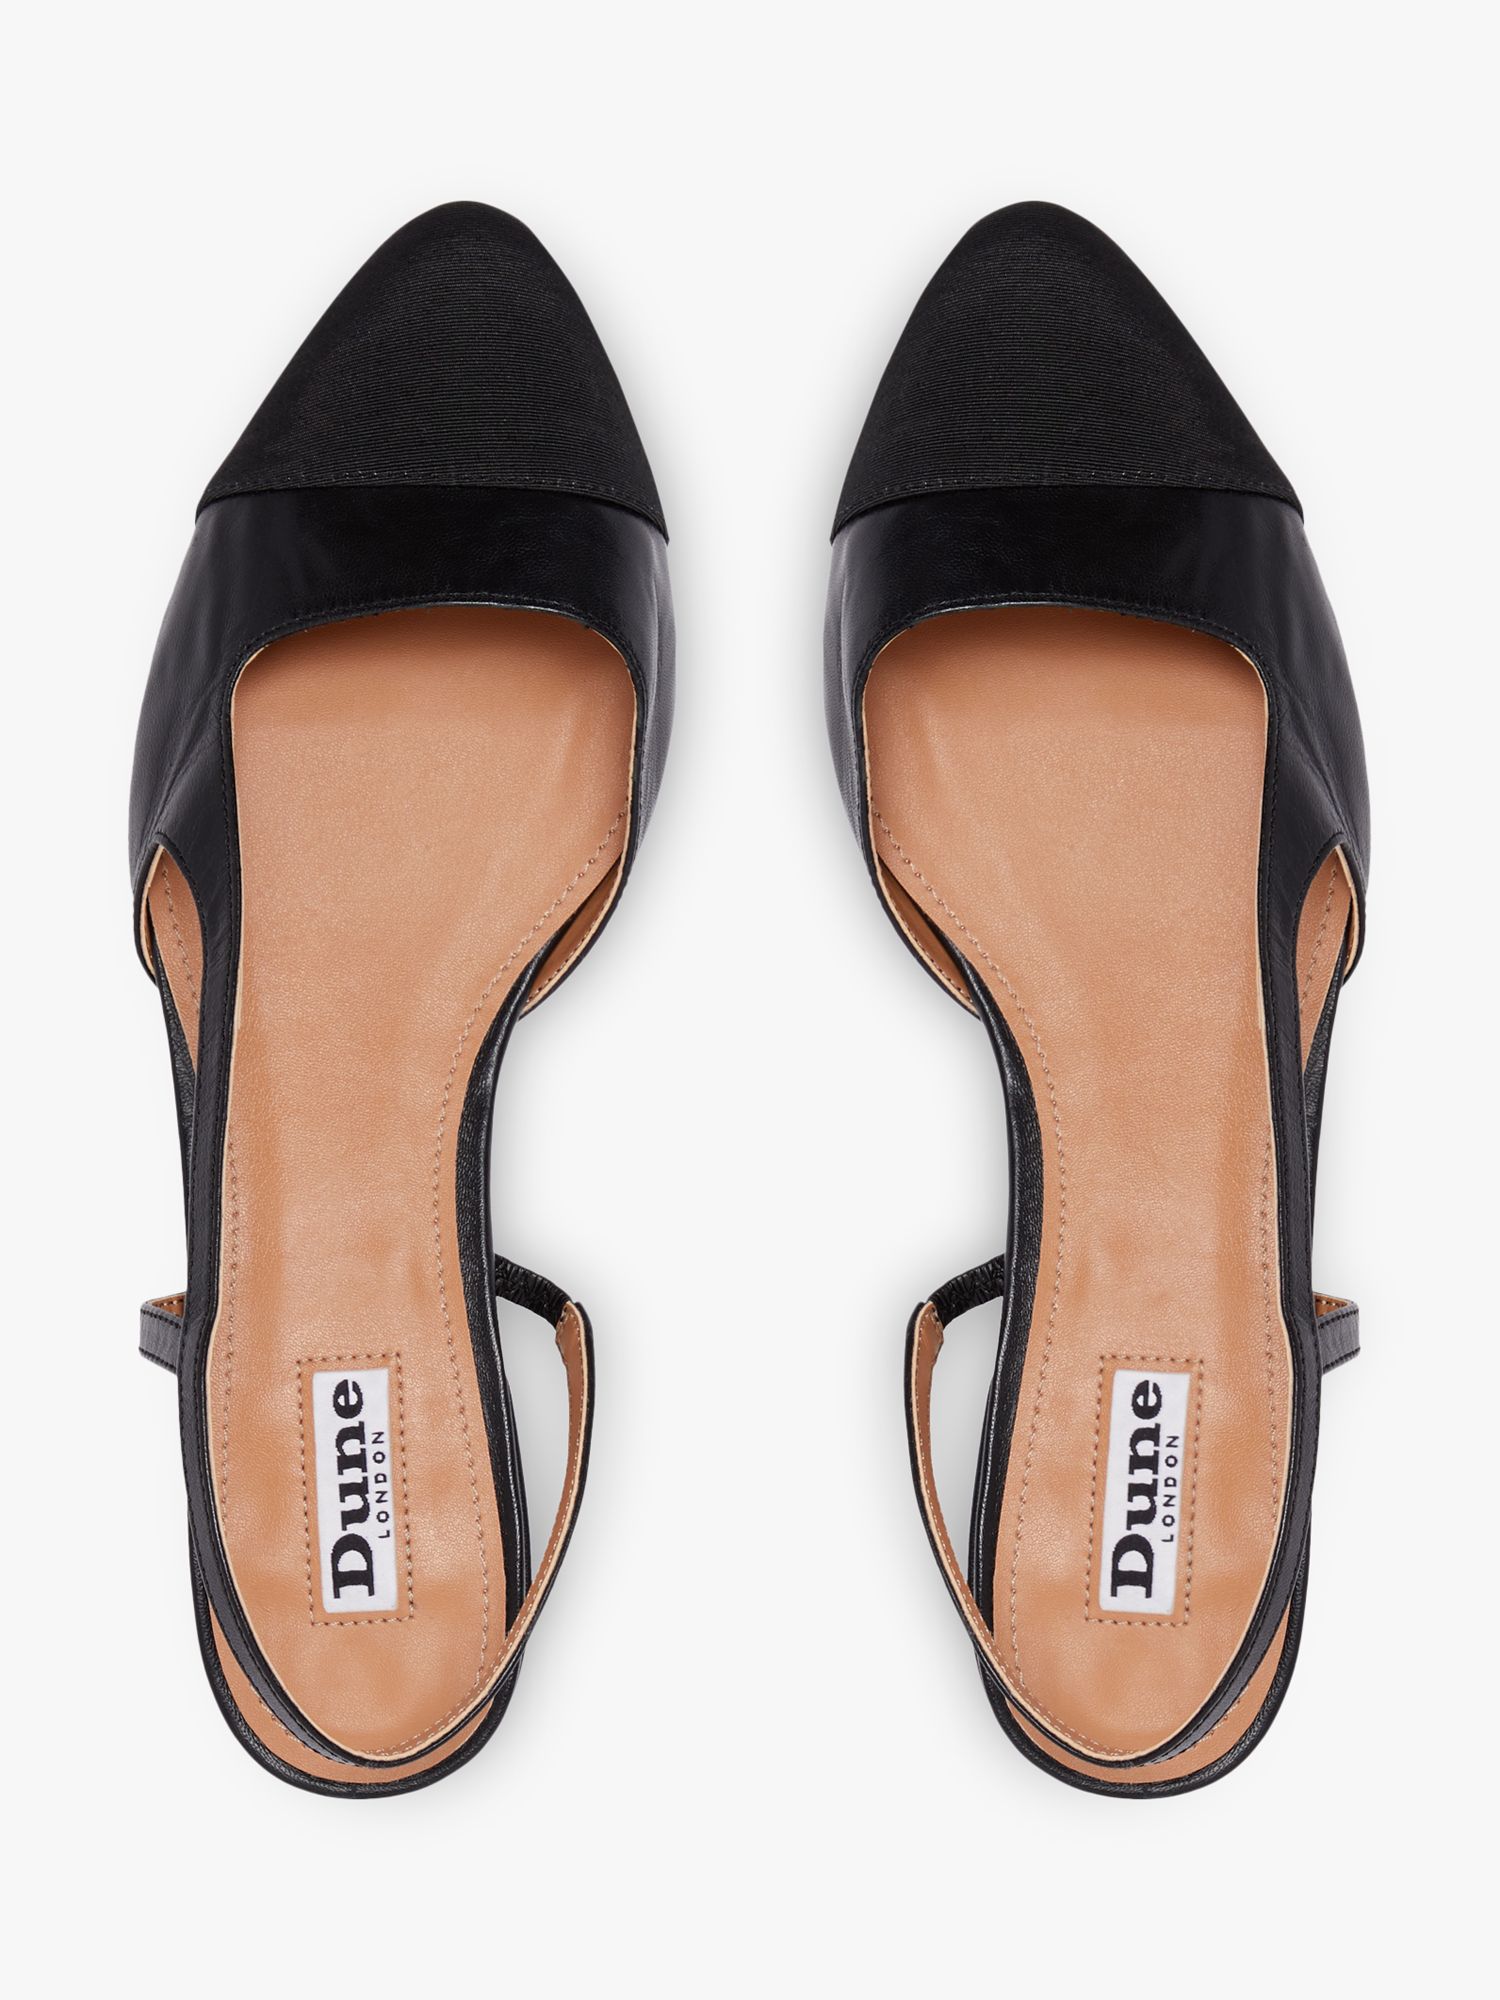 Dune Corallina Leather Pointed Block Heel Slingback Shoes, Black at John Lewis & Partners